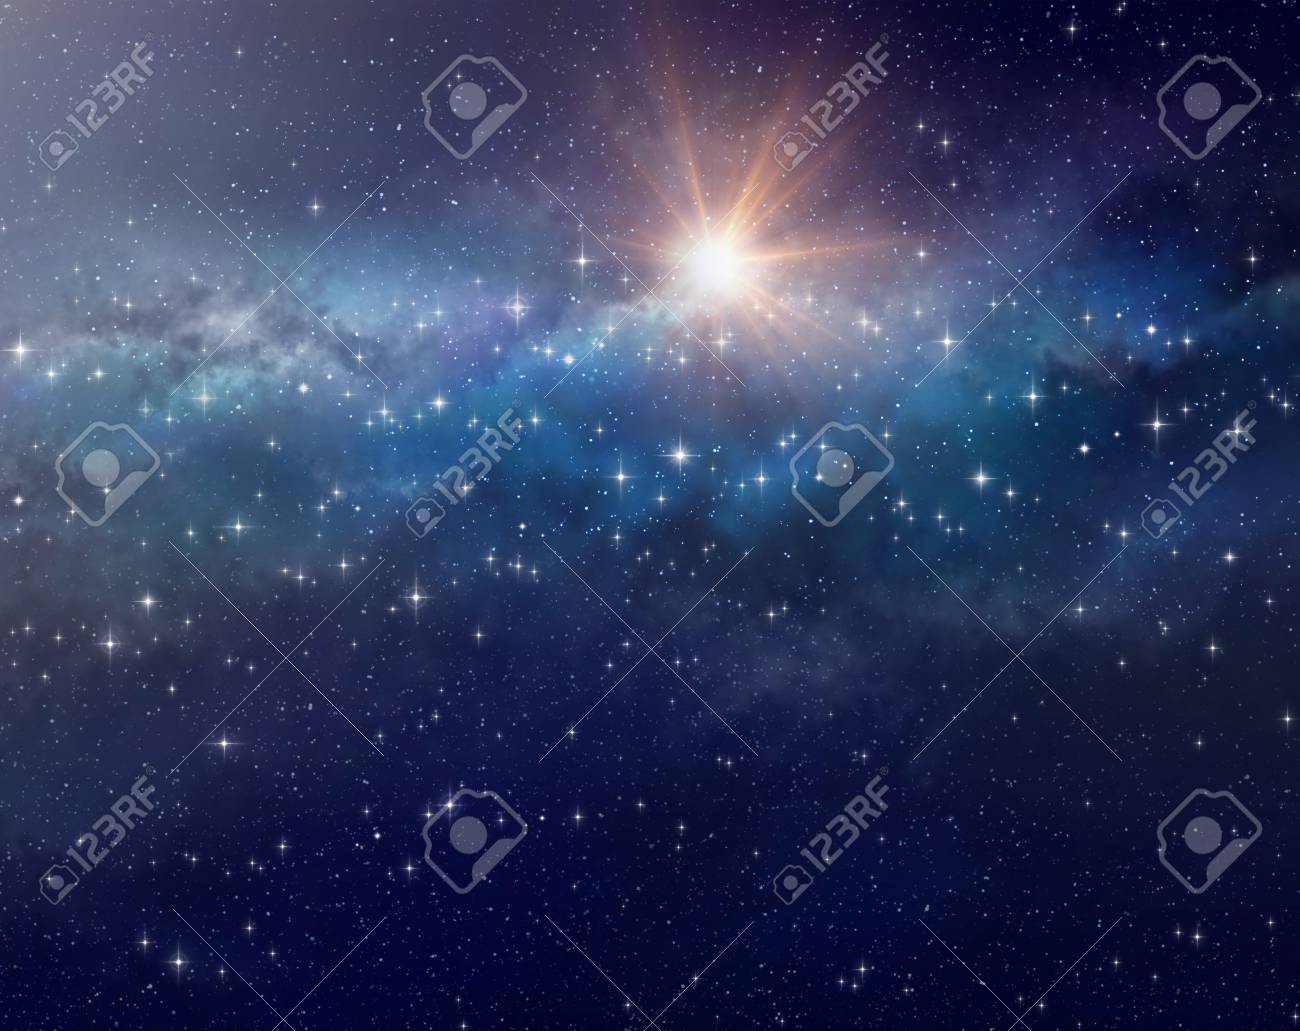 Free download Colorful space galactic background Royalty Vector Image